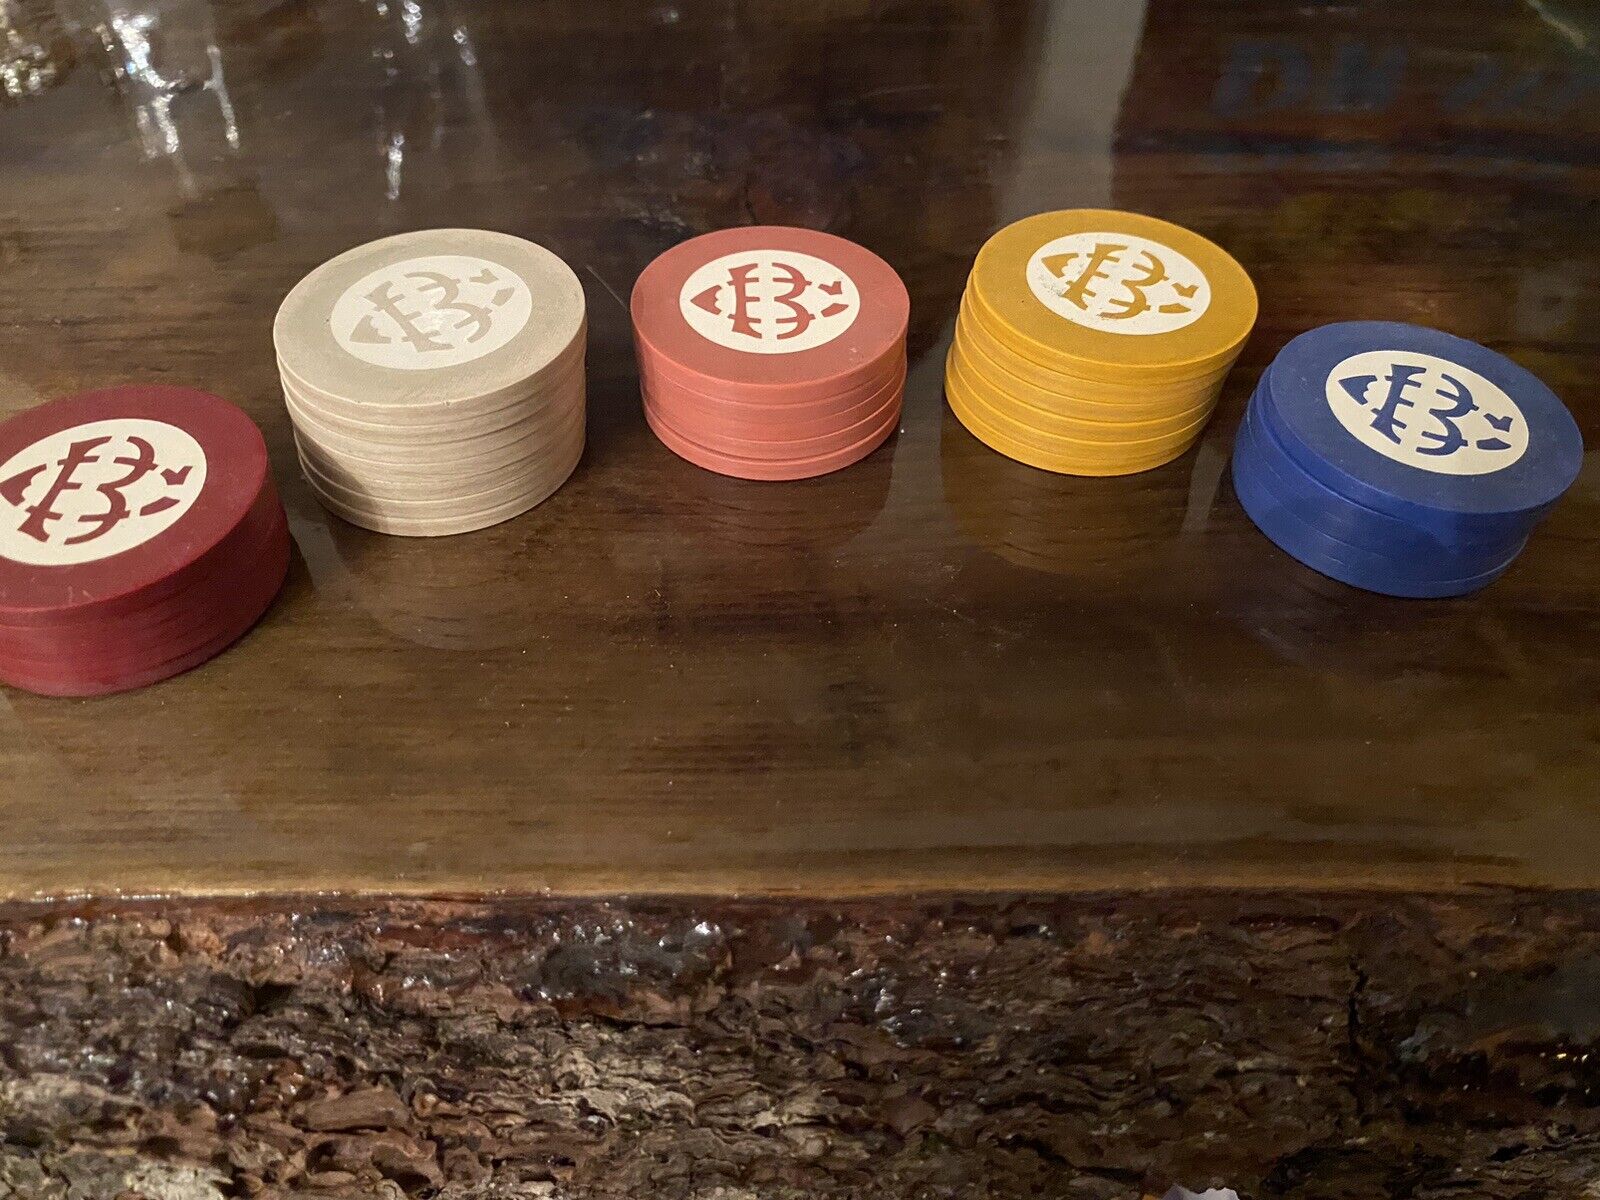 5 illegal gambling chips From The Brook Club Saratoga Spg, NY Arnold Rothstein